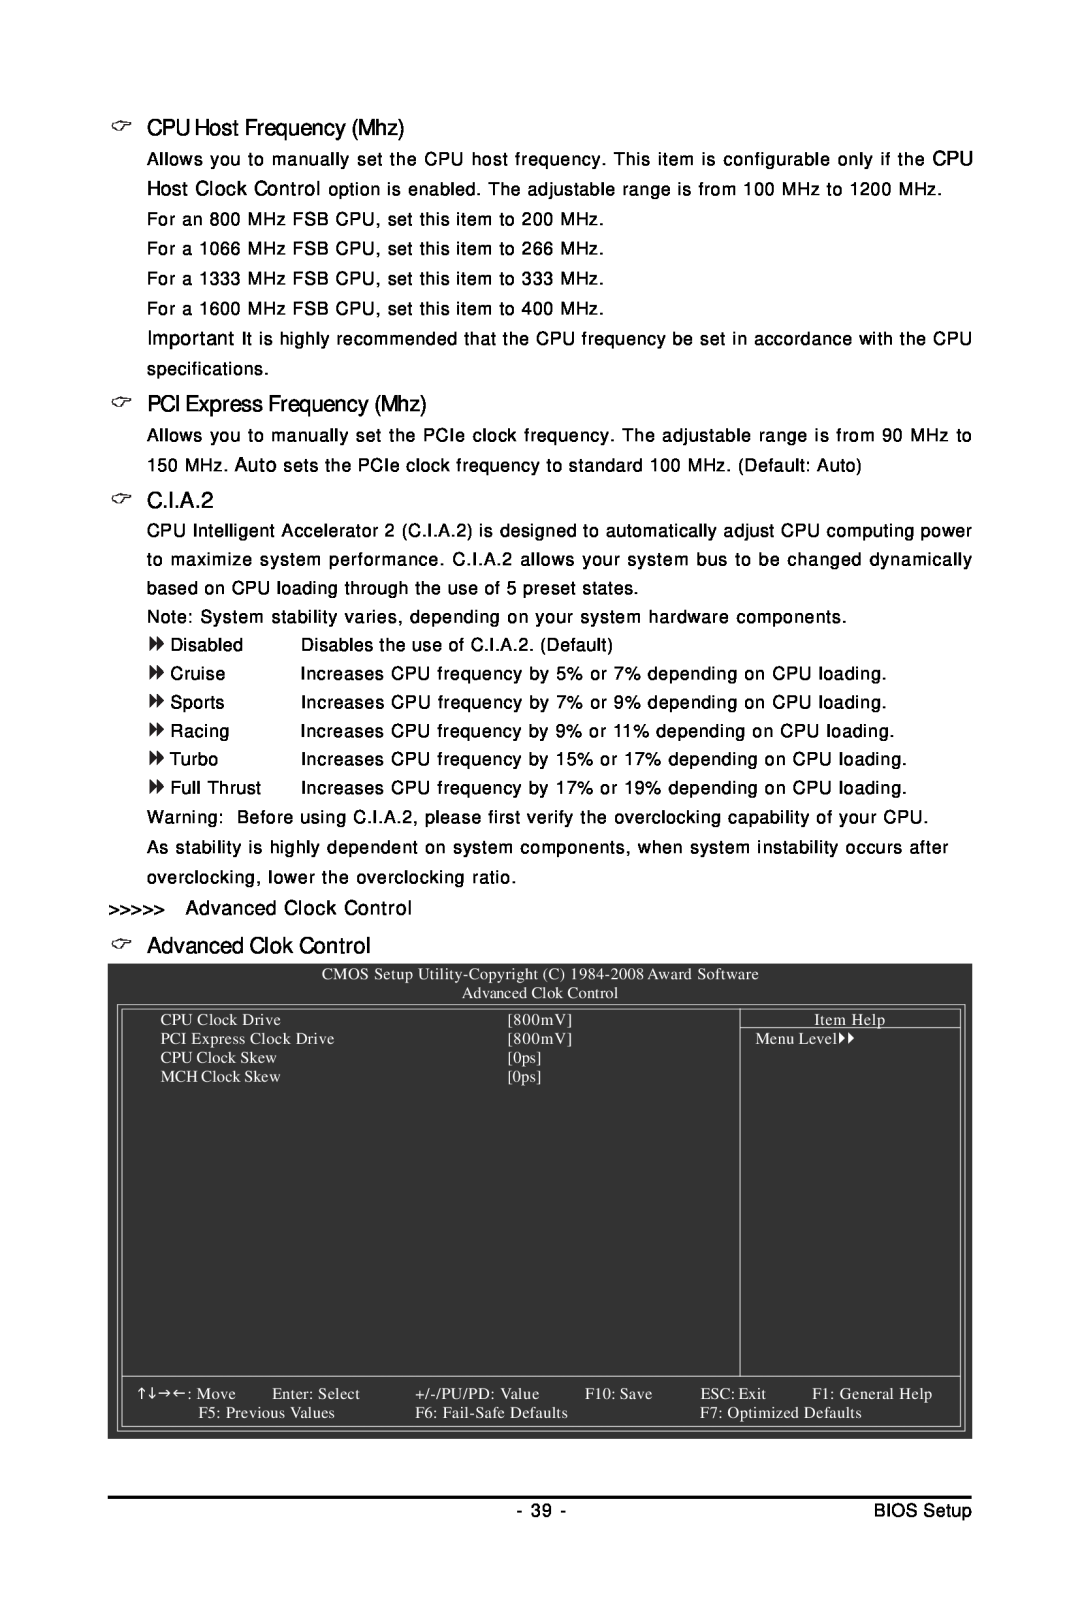 Gigabyte GA-EP45-UD3LR user manual CPU Host Frequency Mhz, PCI Express Frequency Mhz, C.I.A.2, Advanced Clok Control 